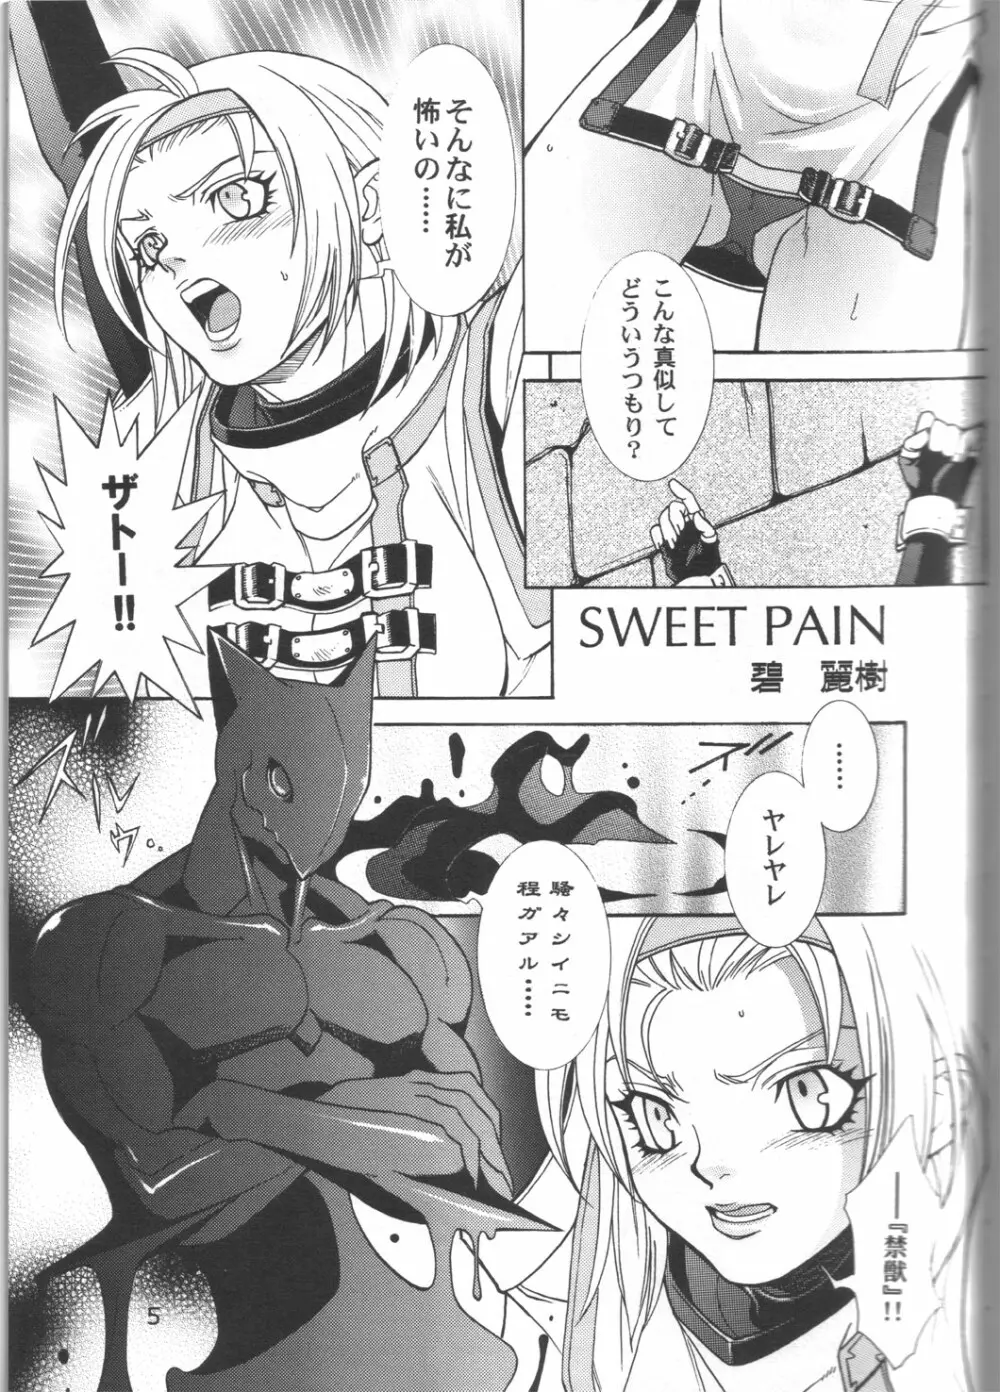 SWEET PAIN - page4